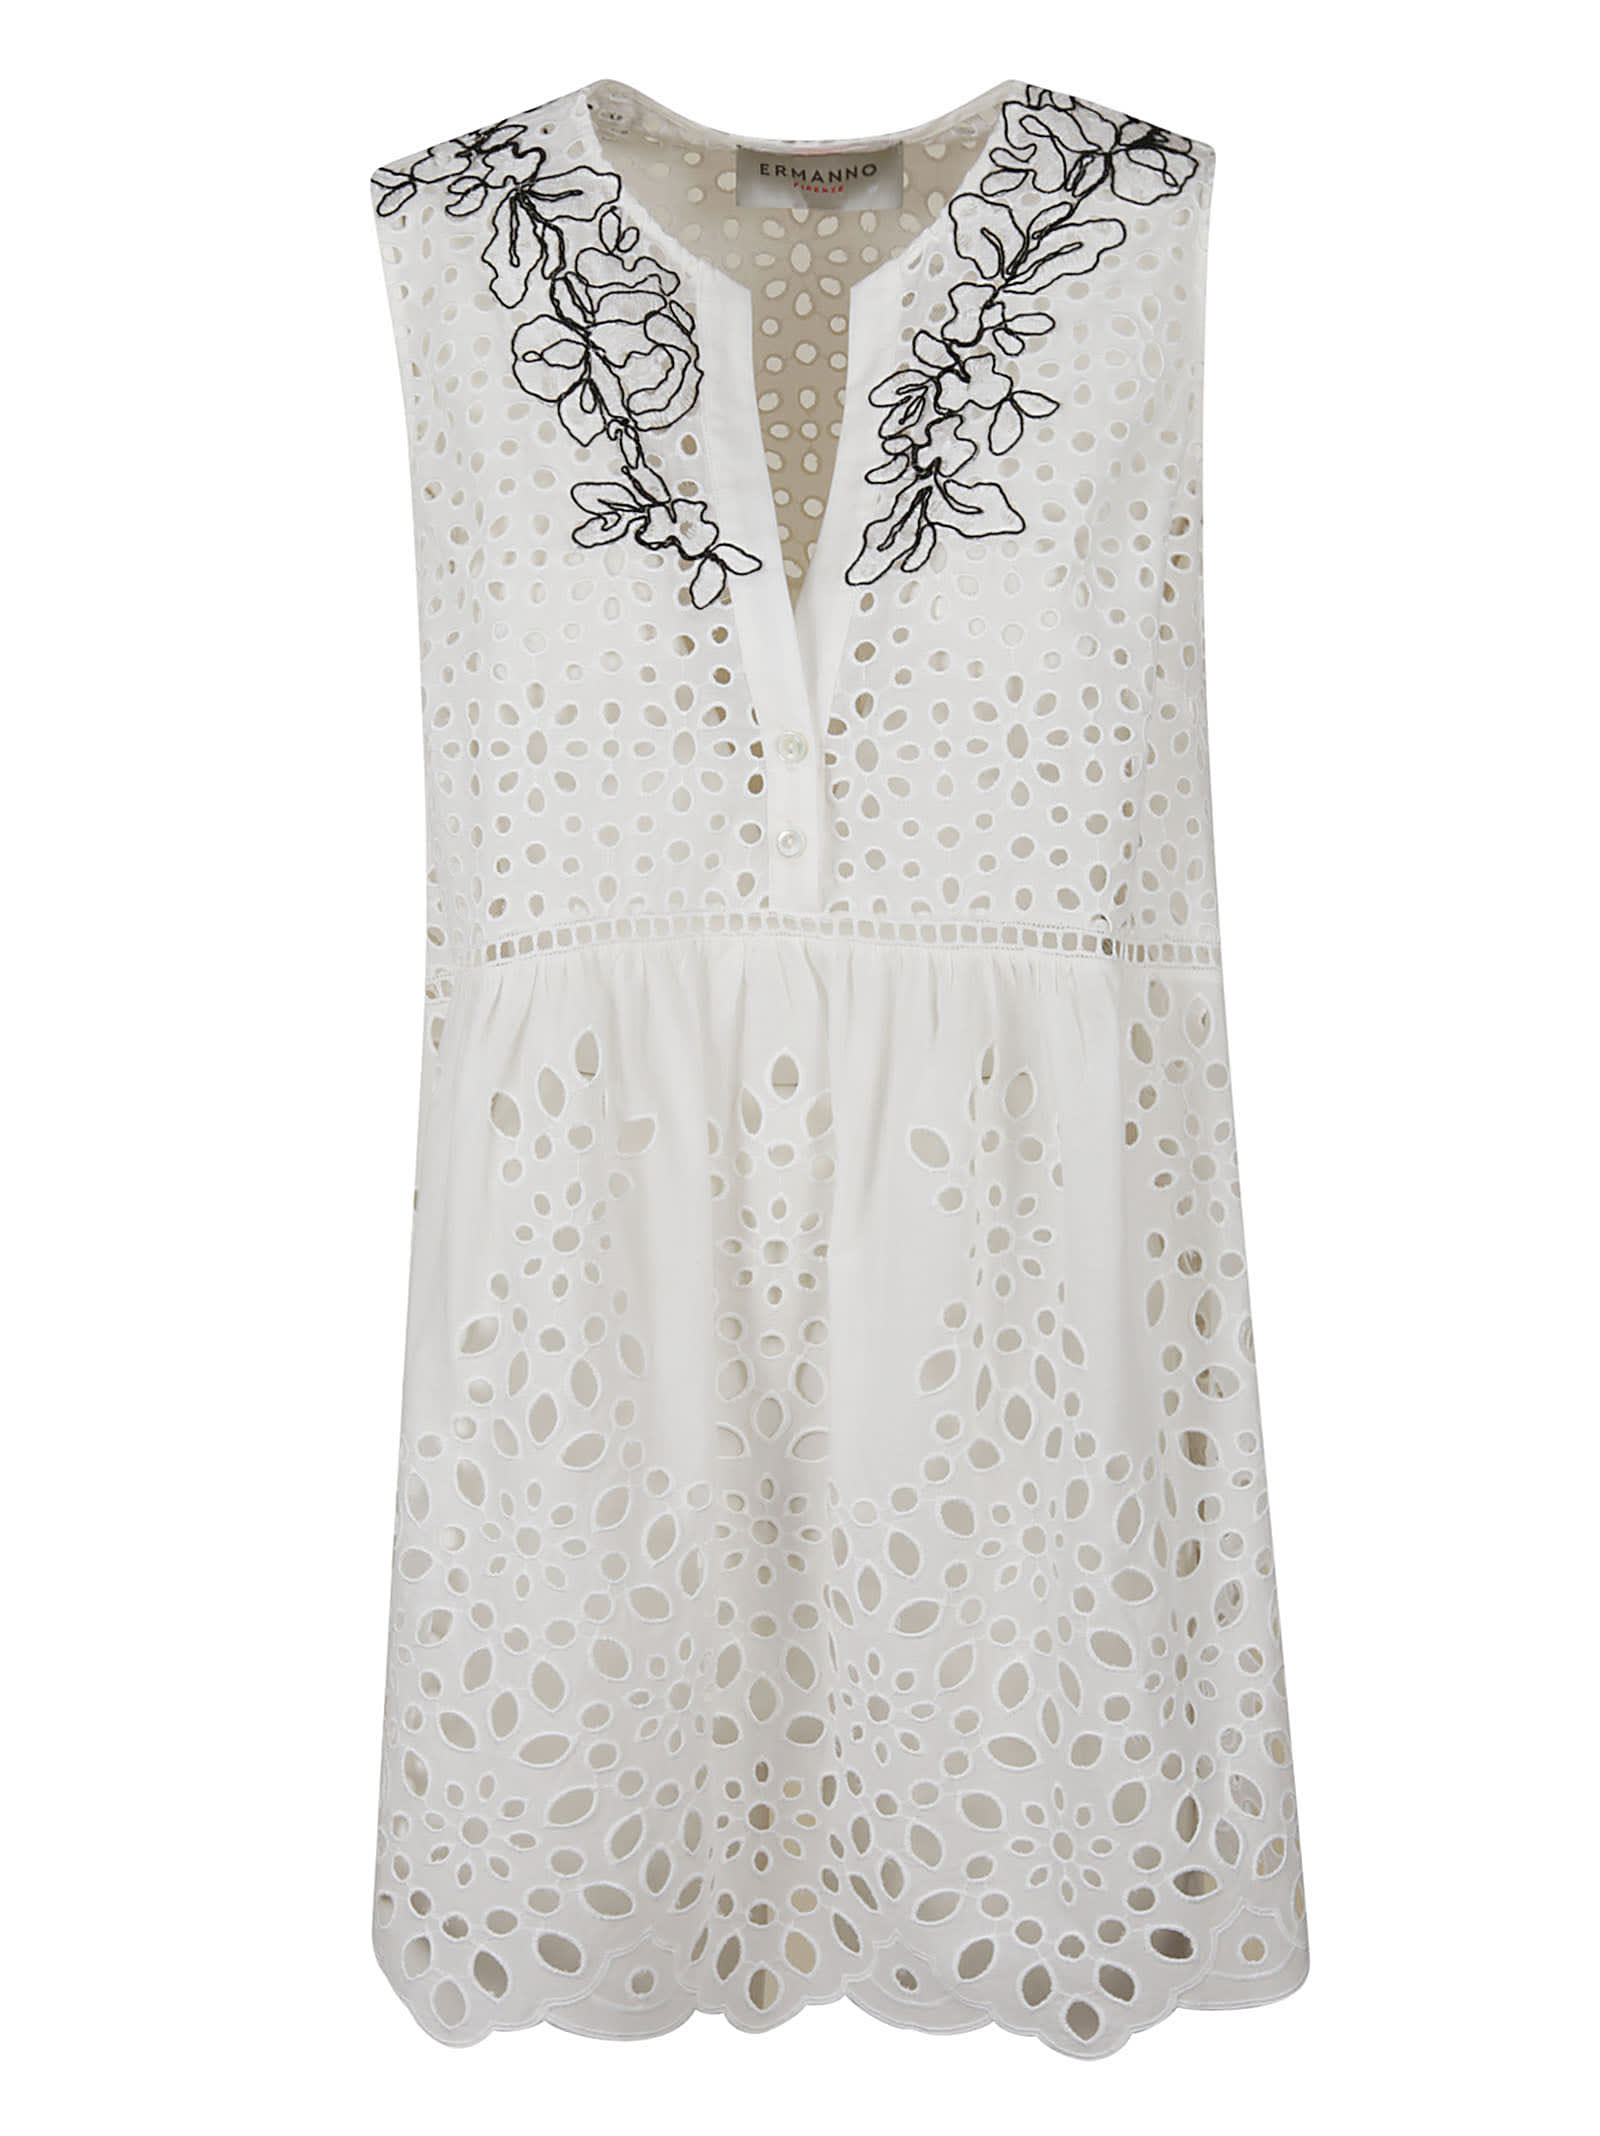 Ermanno Scervino Floral Embroidered Perforated Top